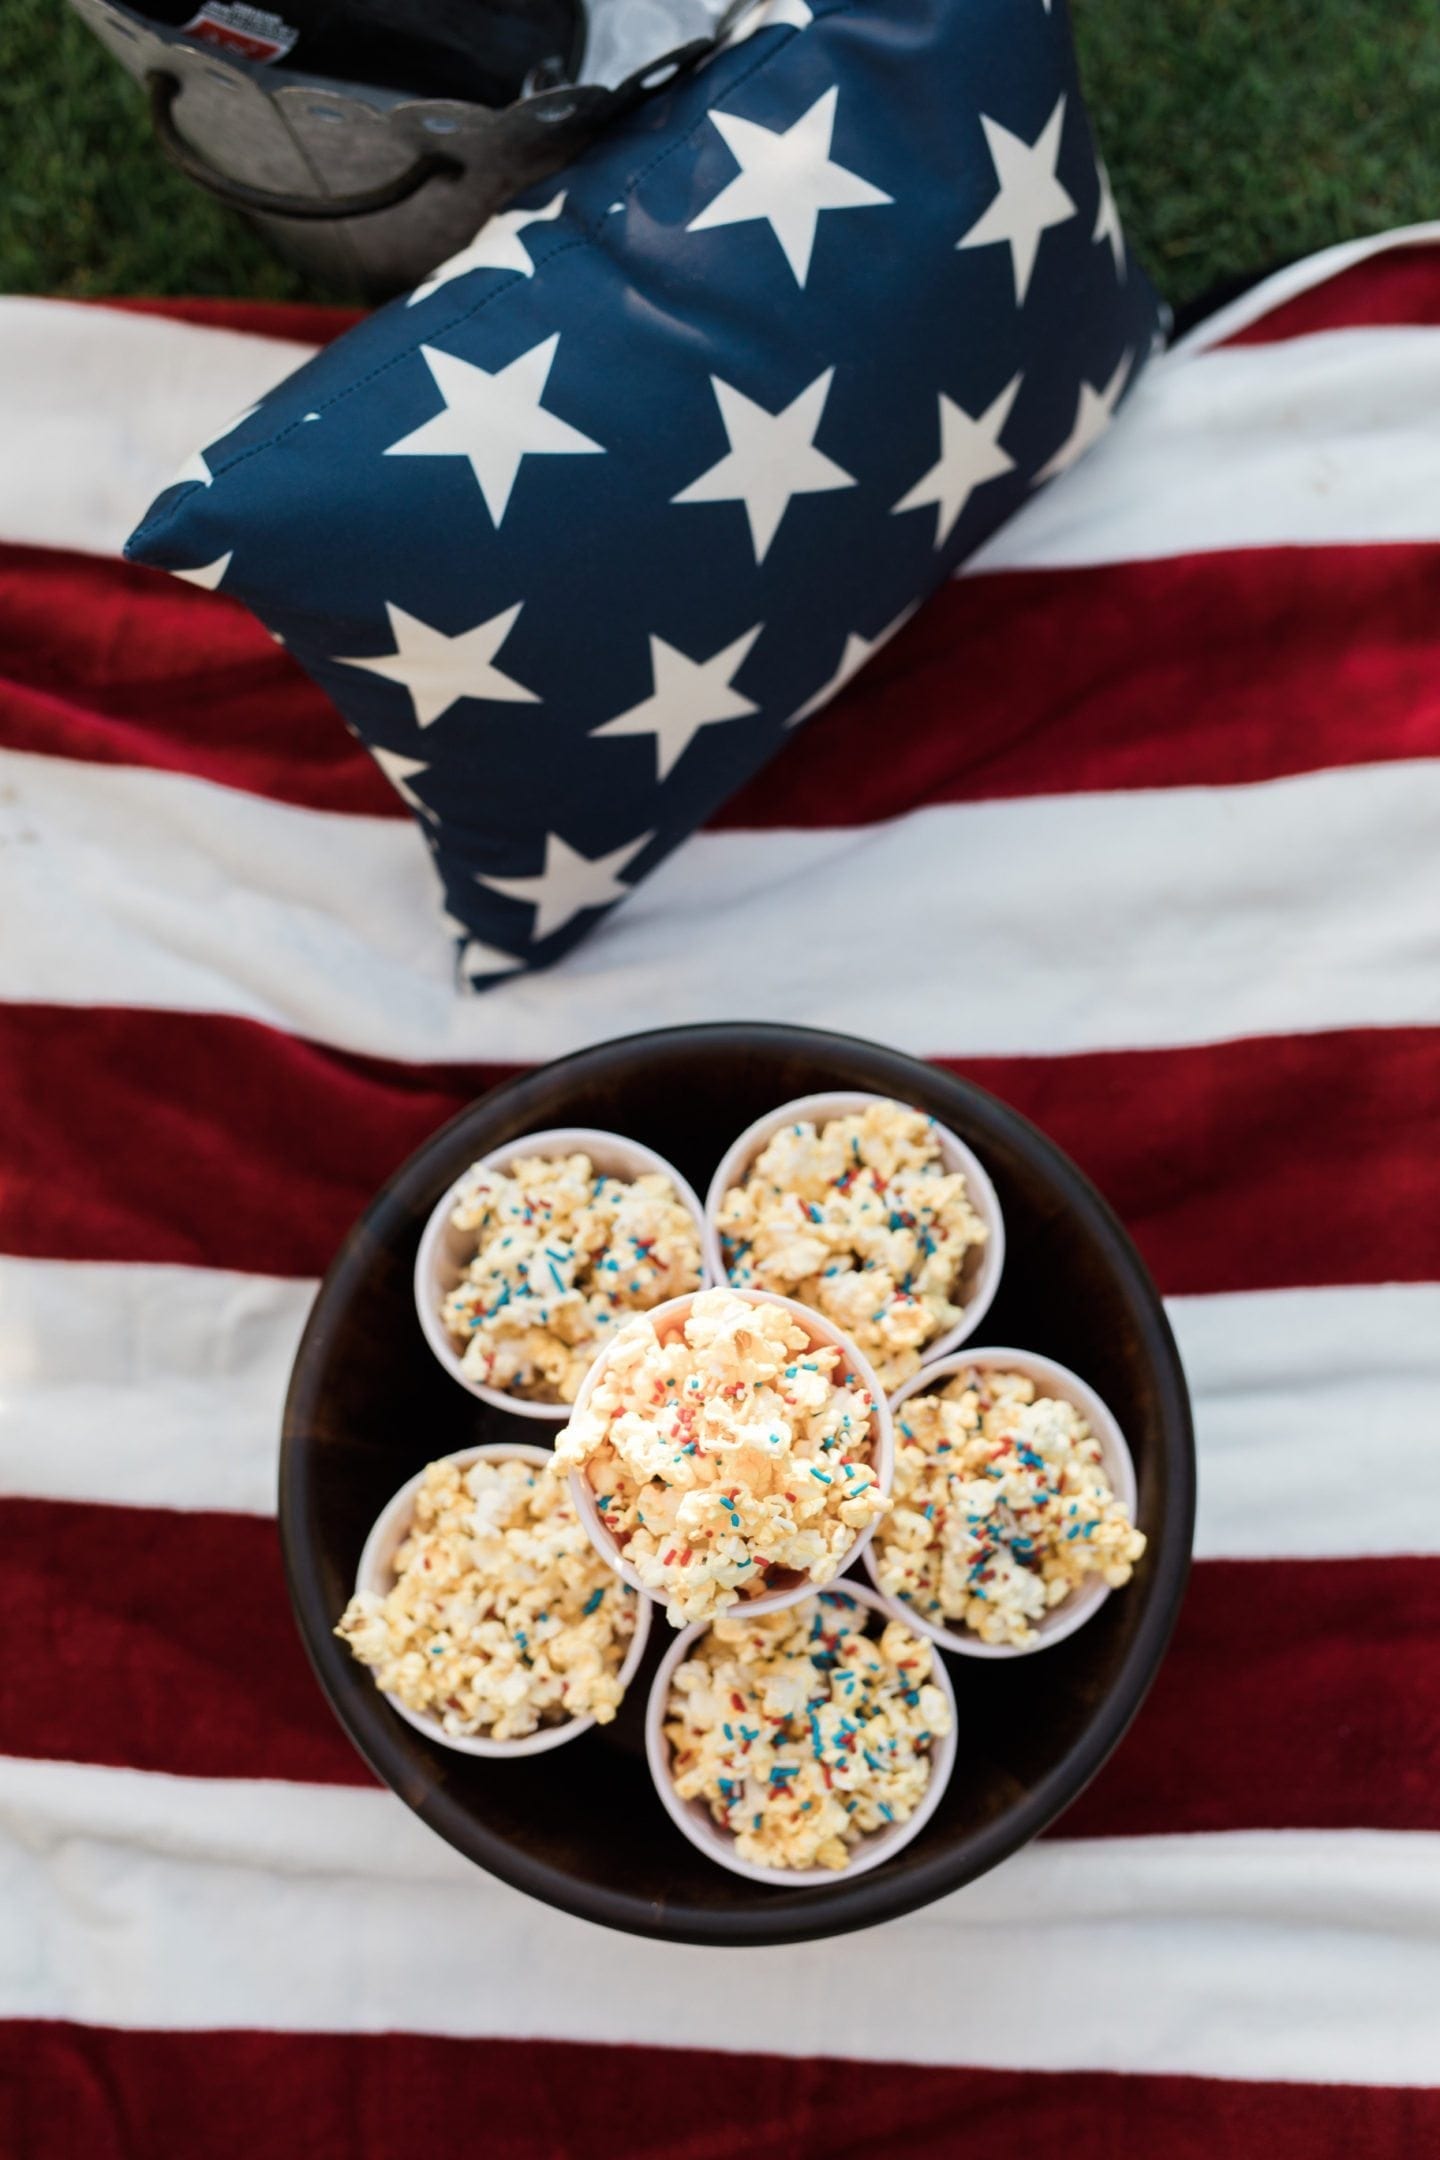 Easy to make popcorn with sprinkles. Fun party popcorn treat!